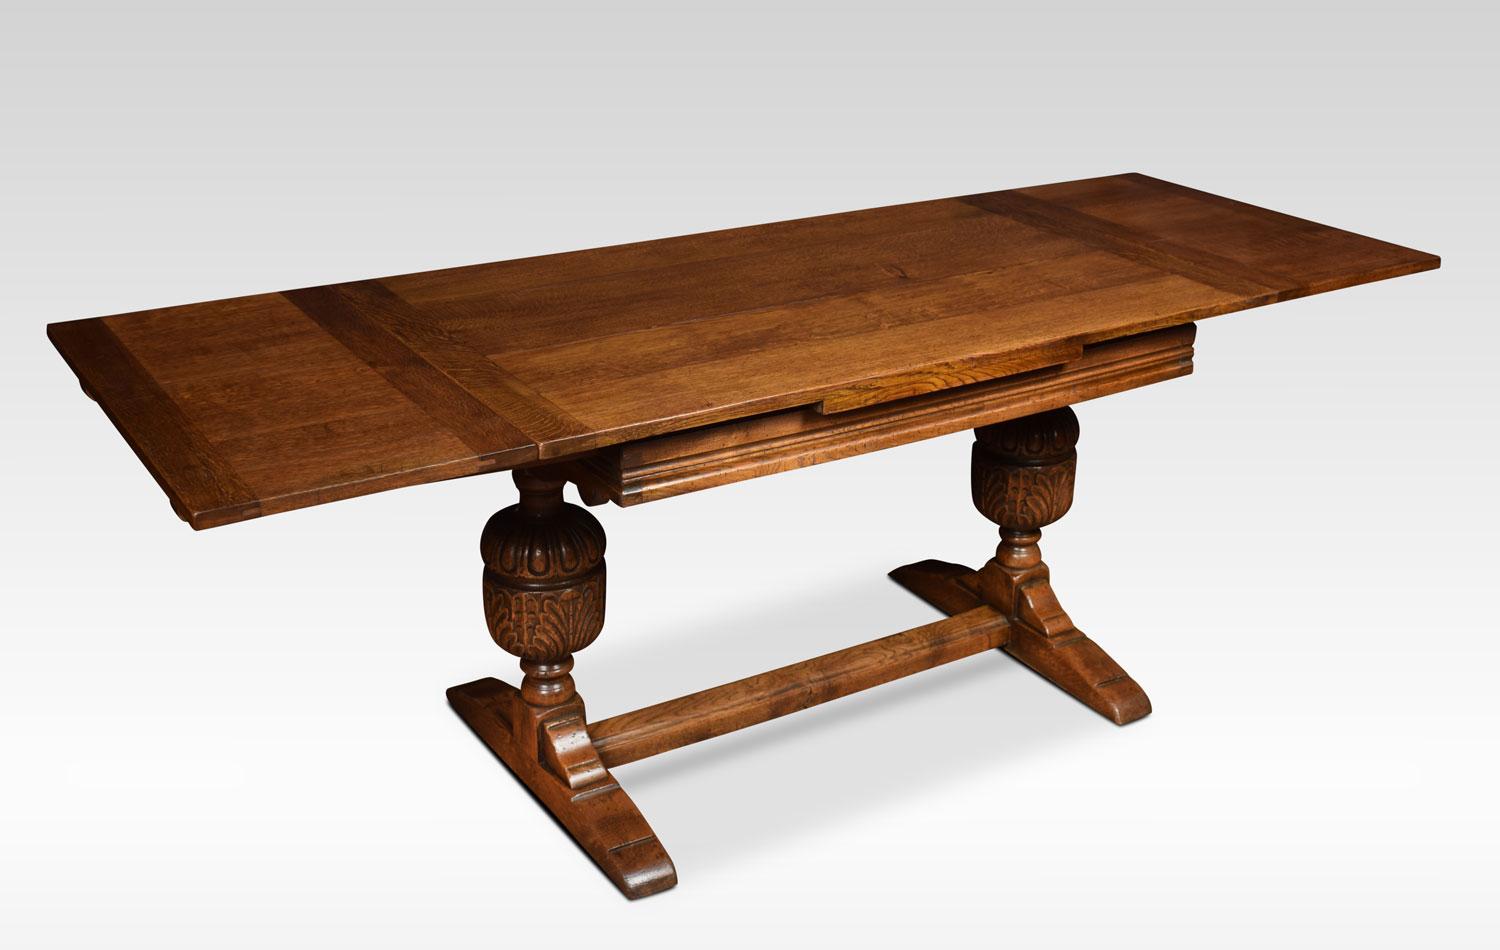 Oak draw leaf refectory table, the rectangular solid oak top having pullout / pull-out ends. Above lobed and leaf carved cup and cover supports united by a stretcher.
Dimensions:
Height 29.5 inches
Length 51 inches when open 84 inches
Width 30.5